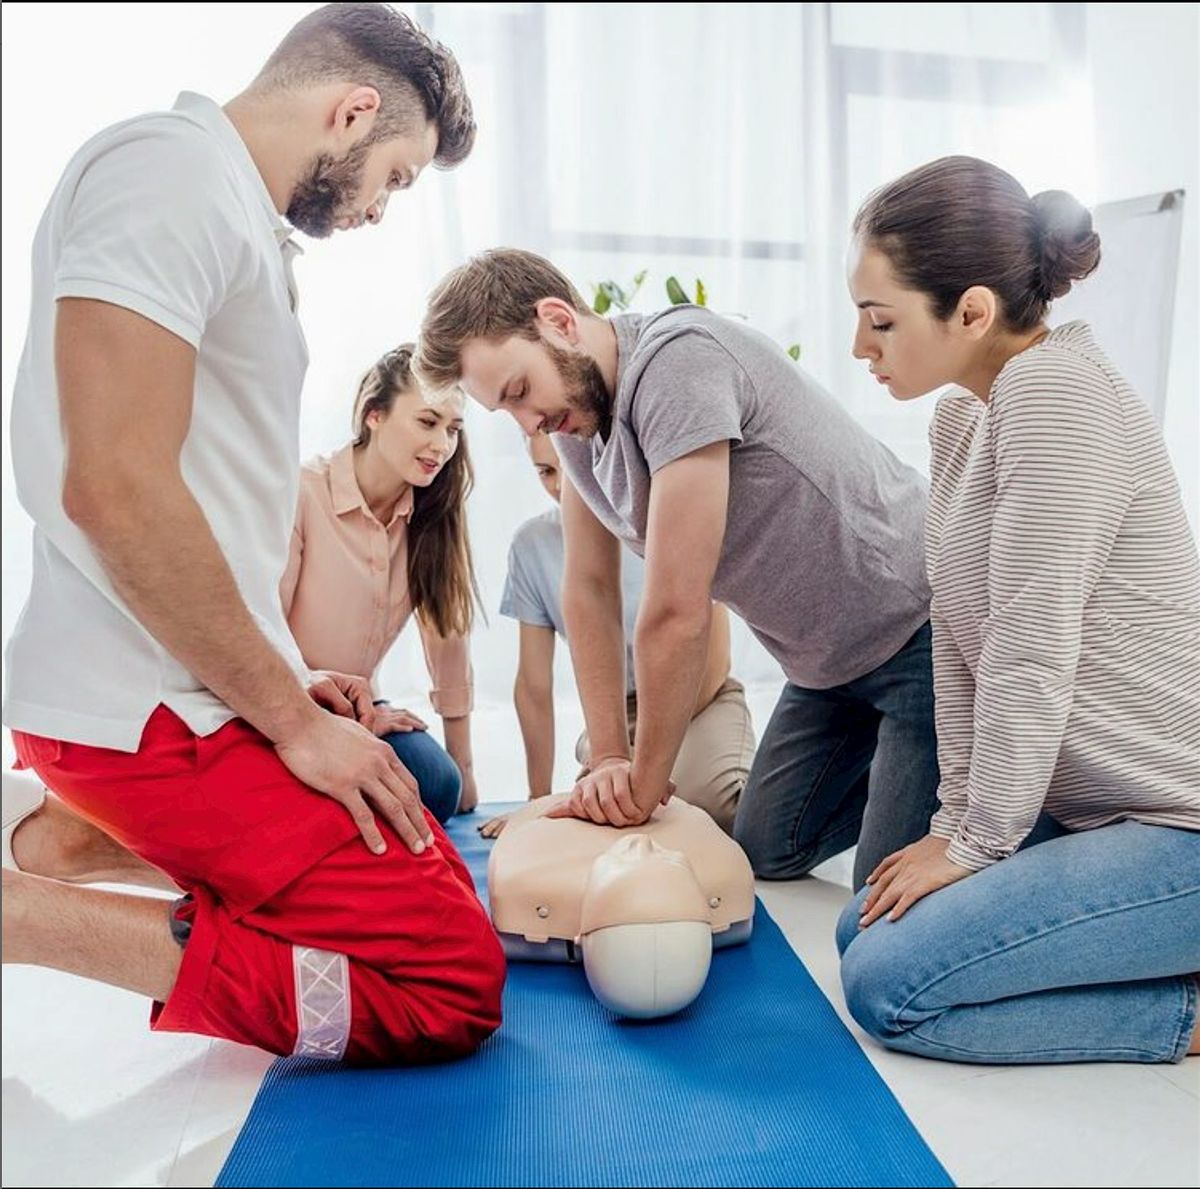 BLS Provider CPR & AED Class - CPR Class for Adults, Children & Infants